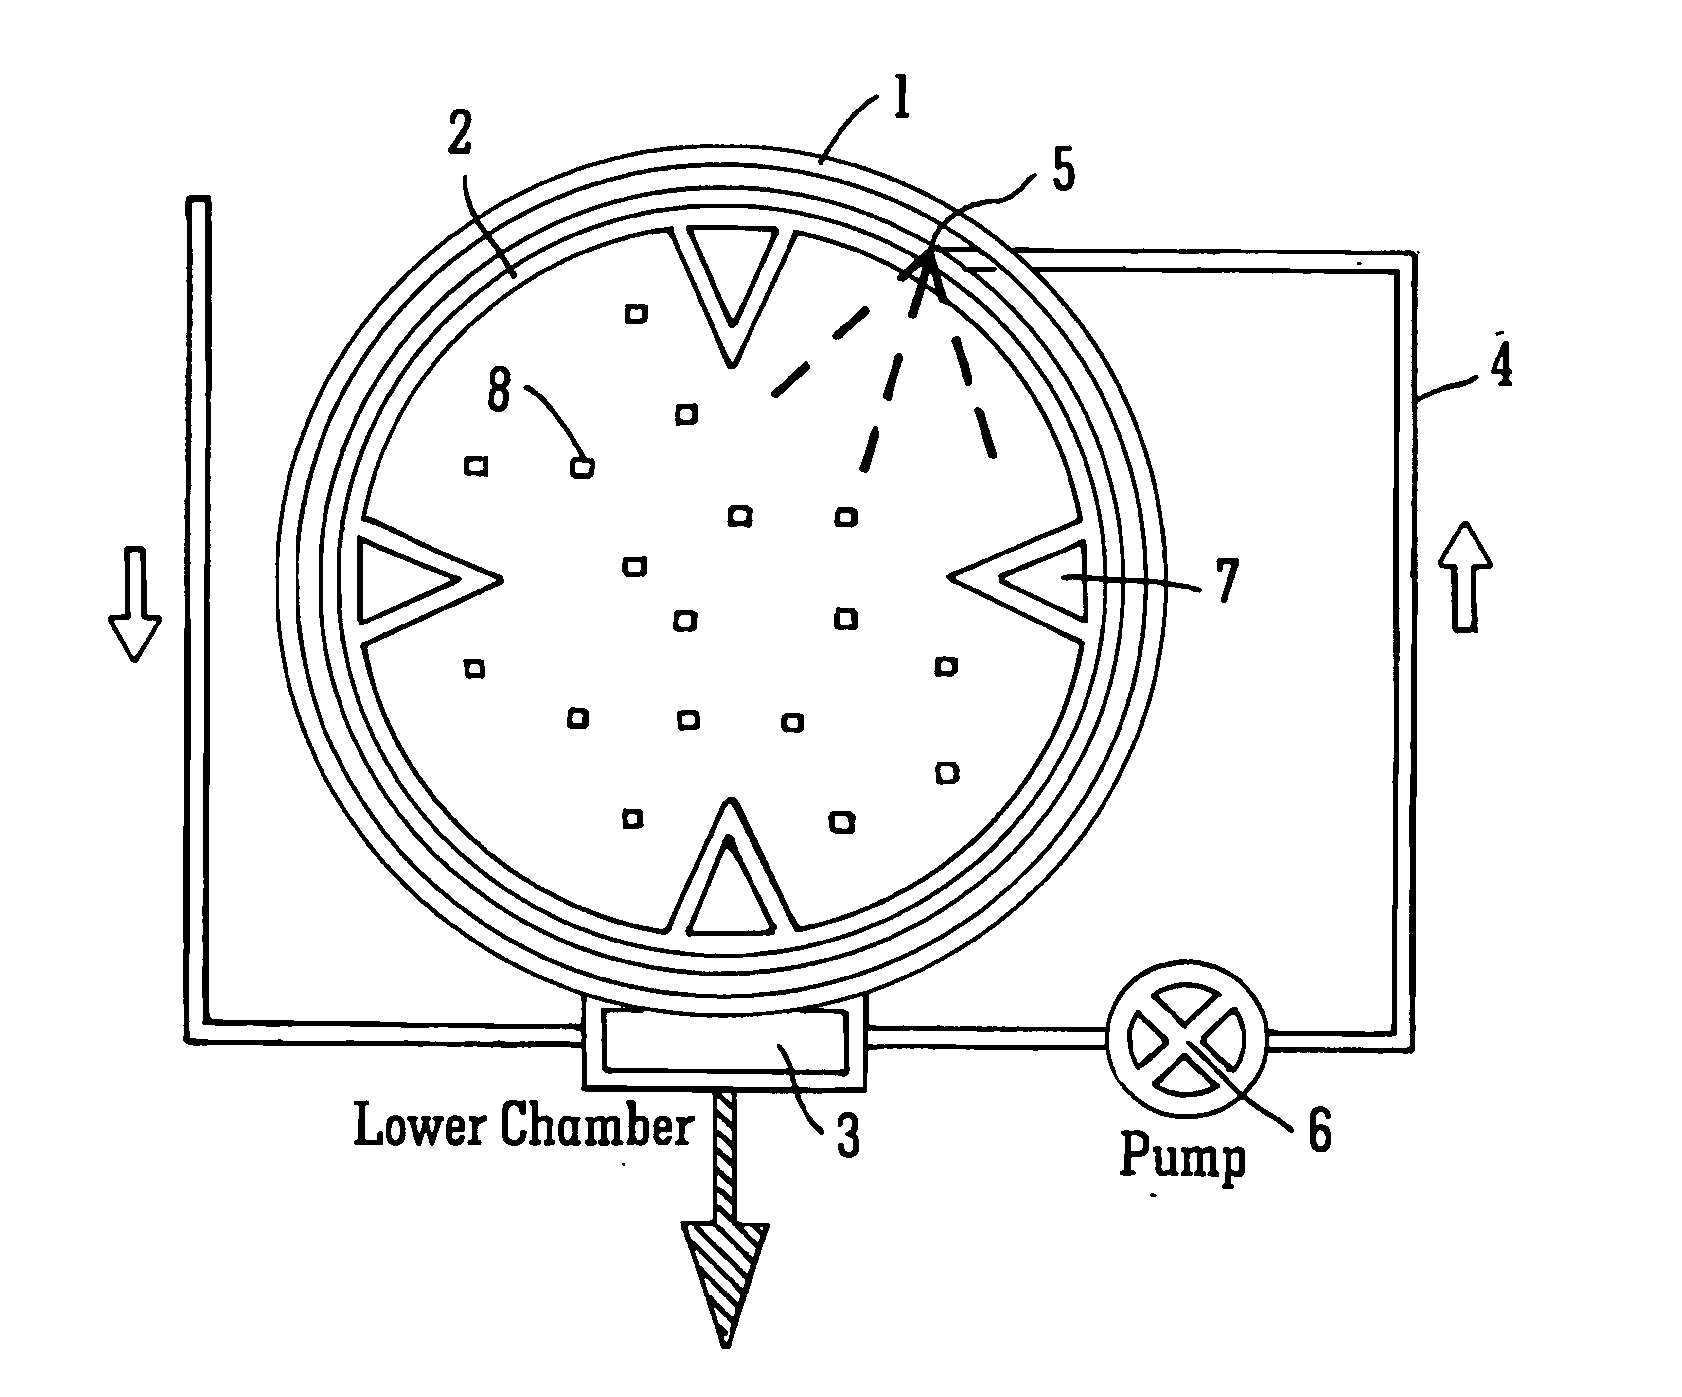 New cleaning apparatus and method